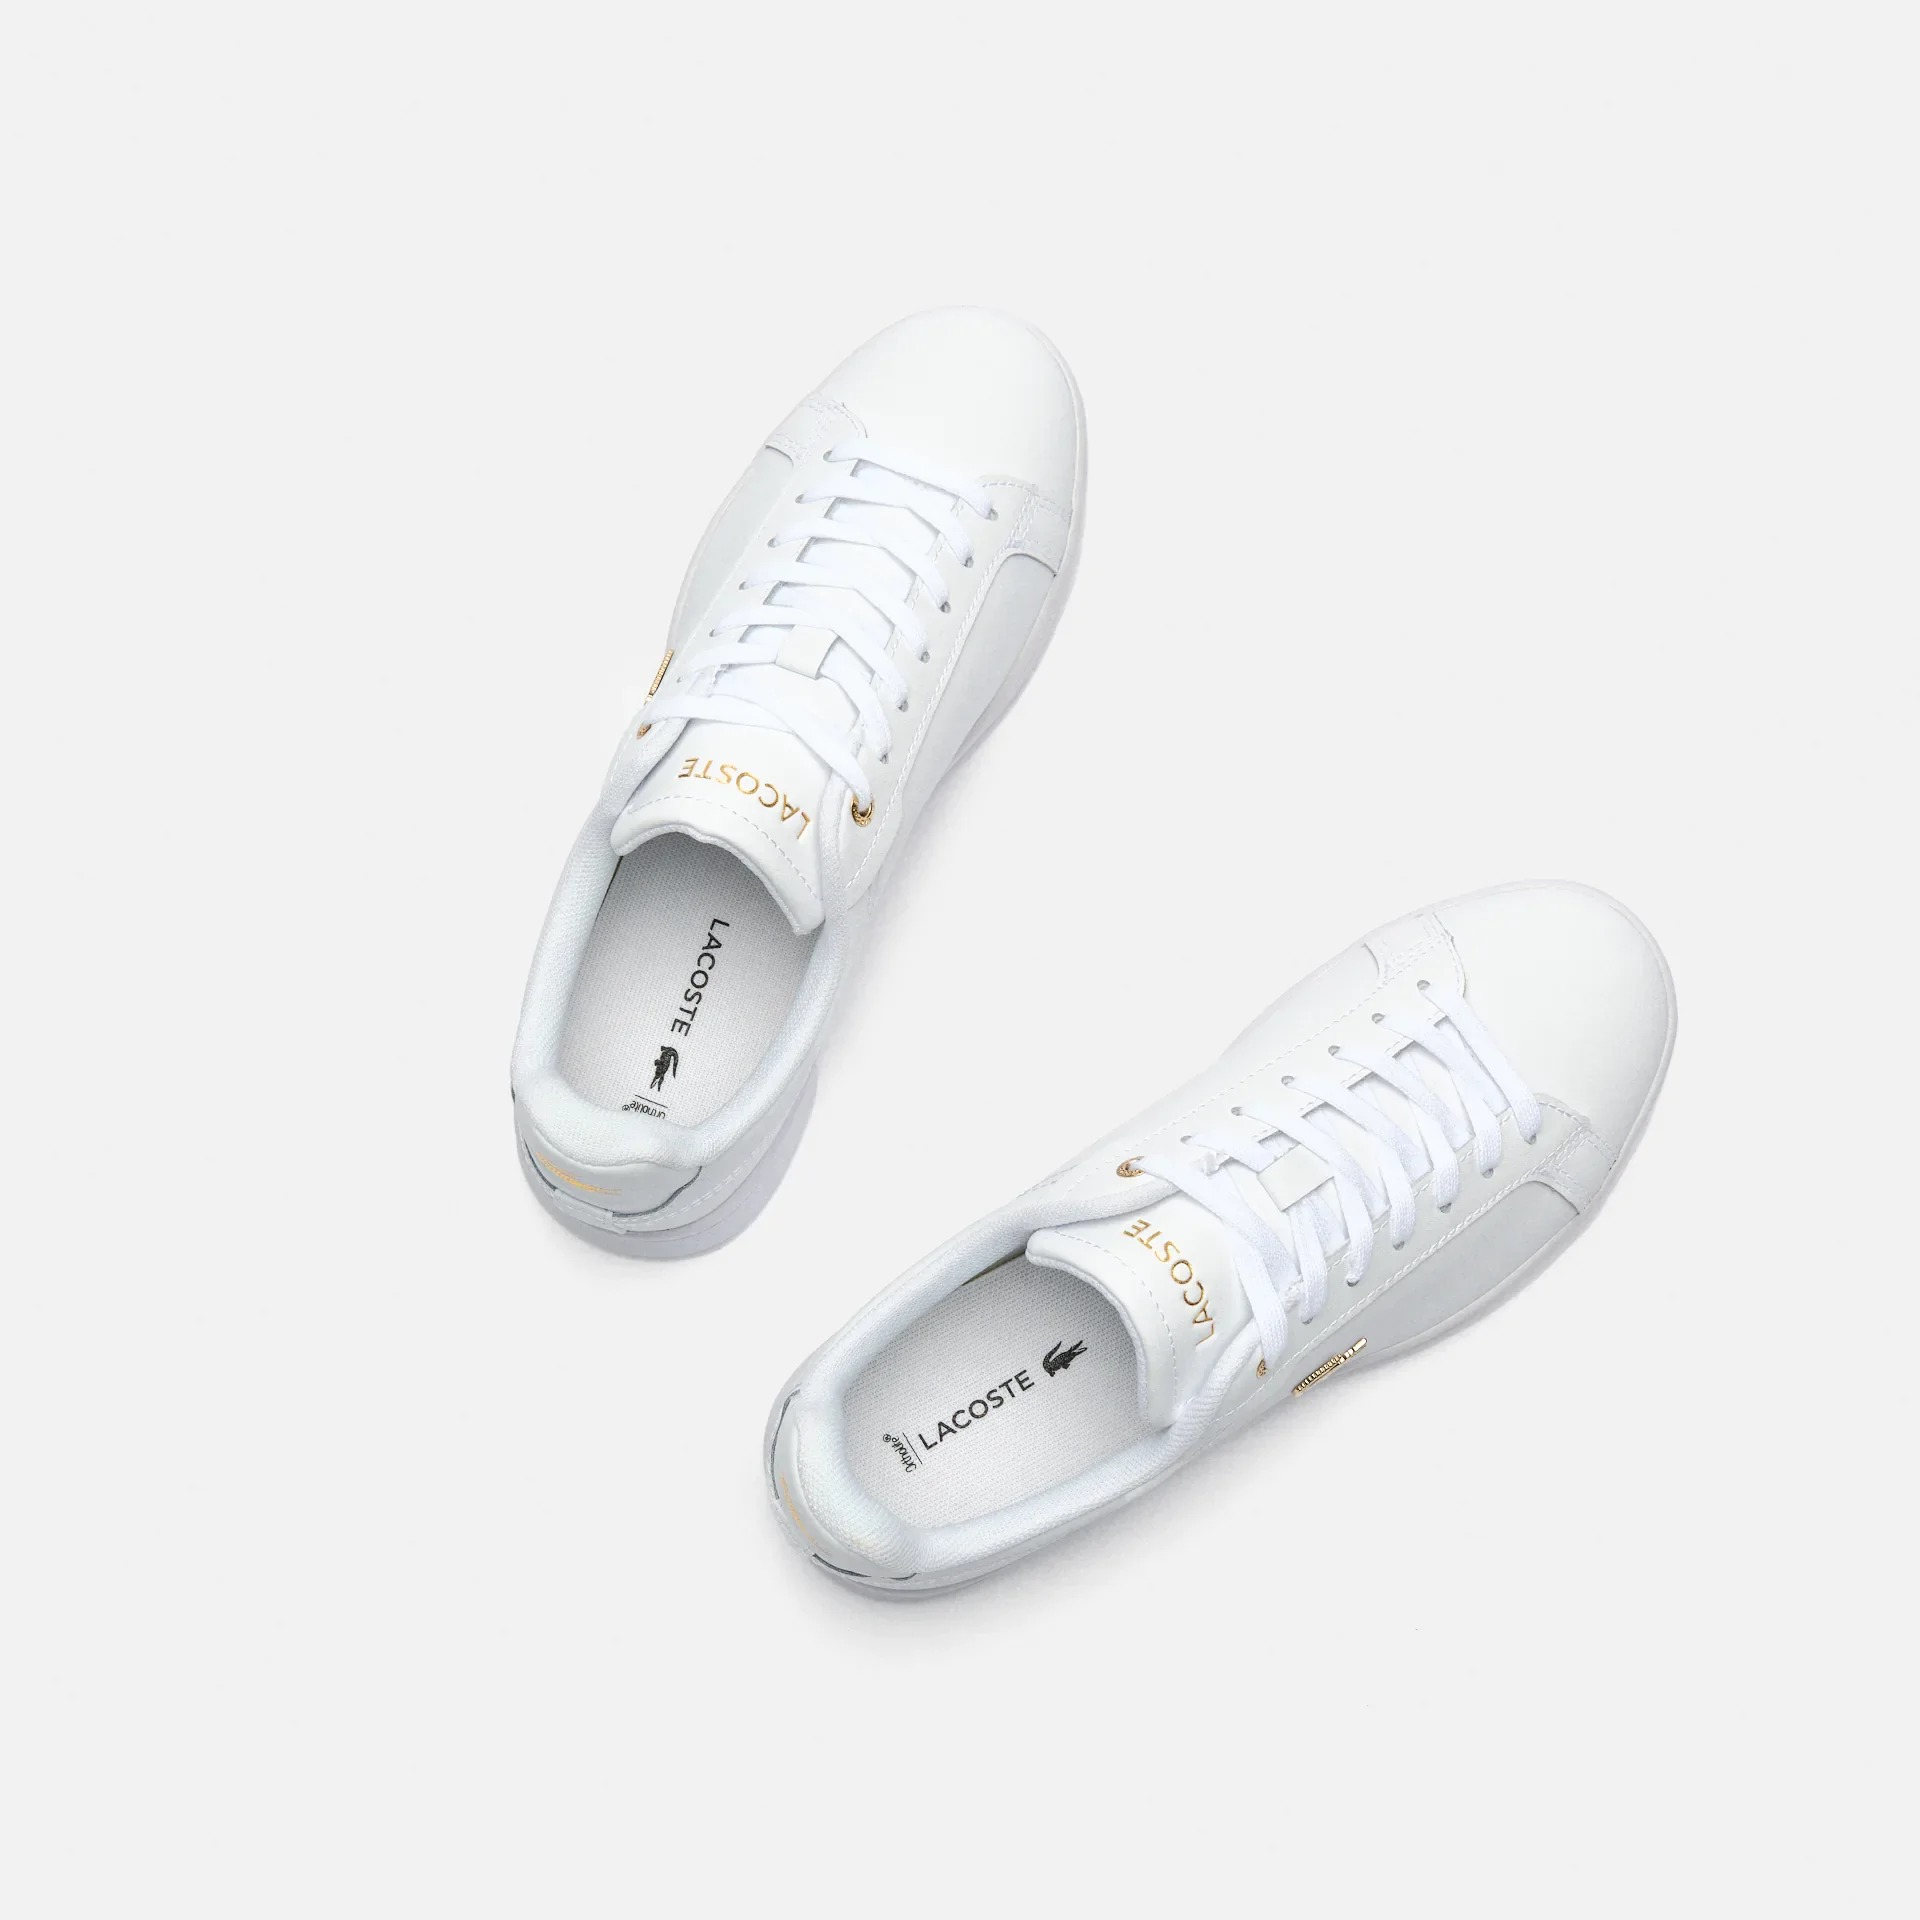 Lacoste Carnaby Pro Leather Sneaker White/Gold